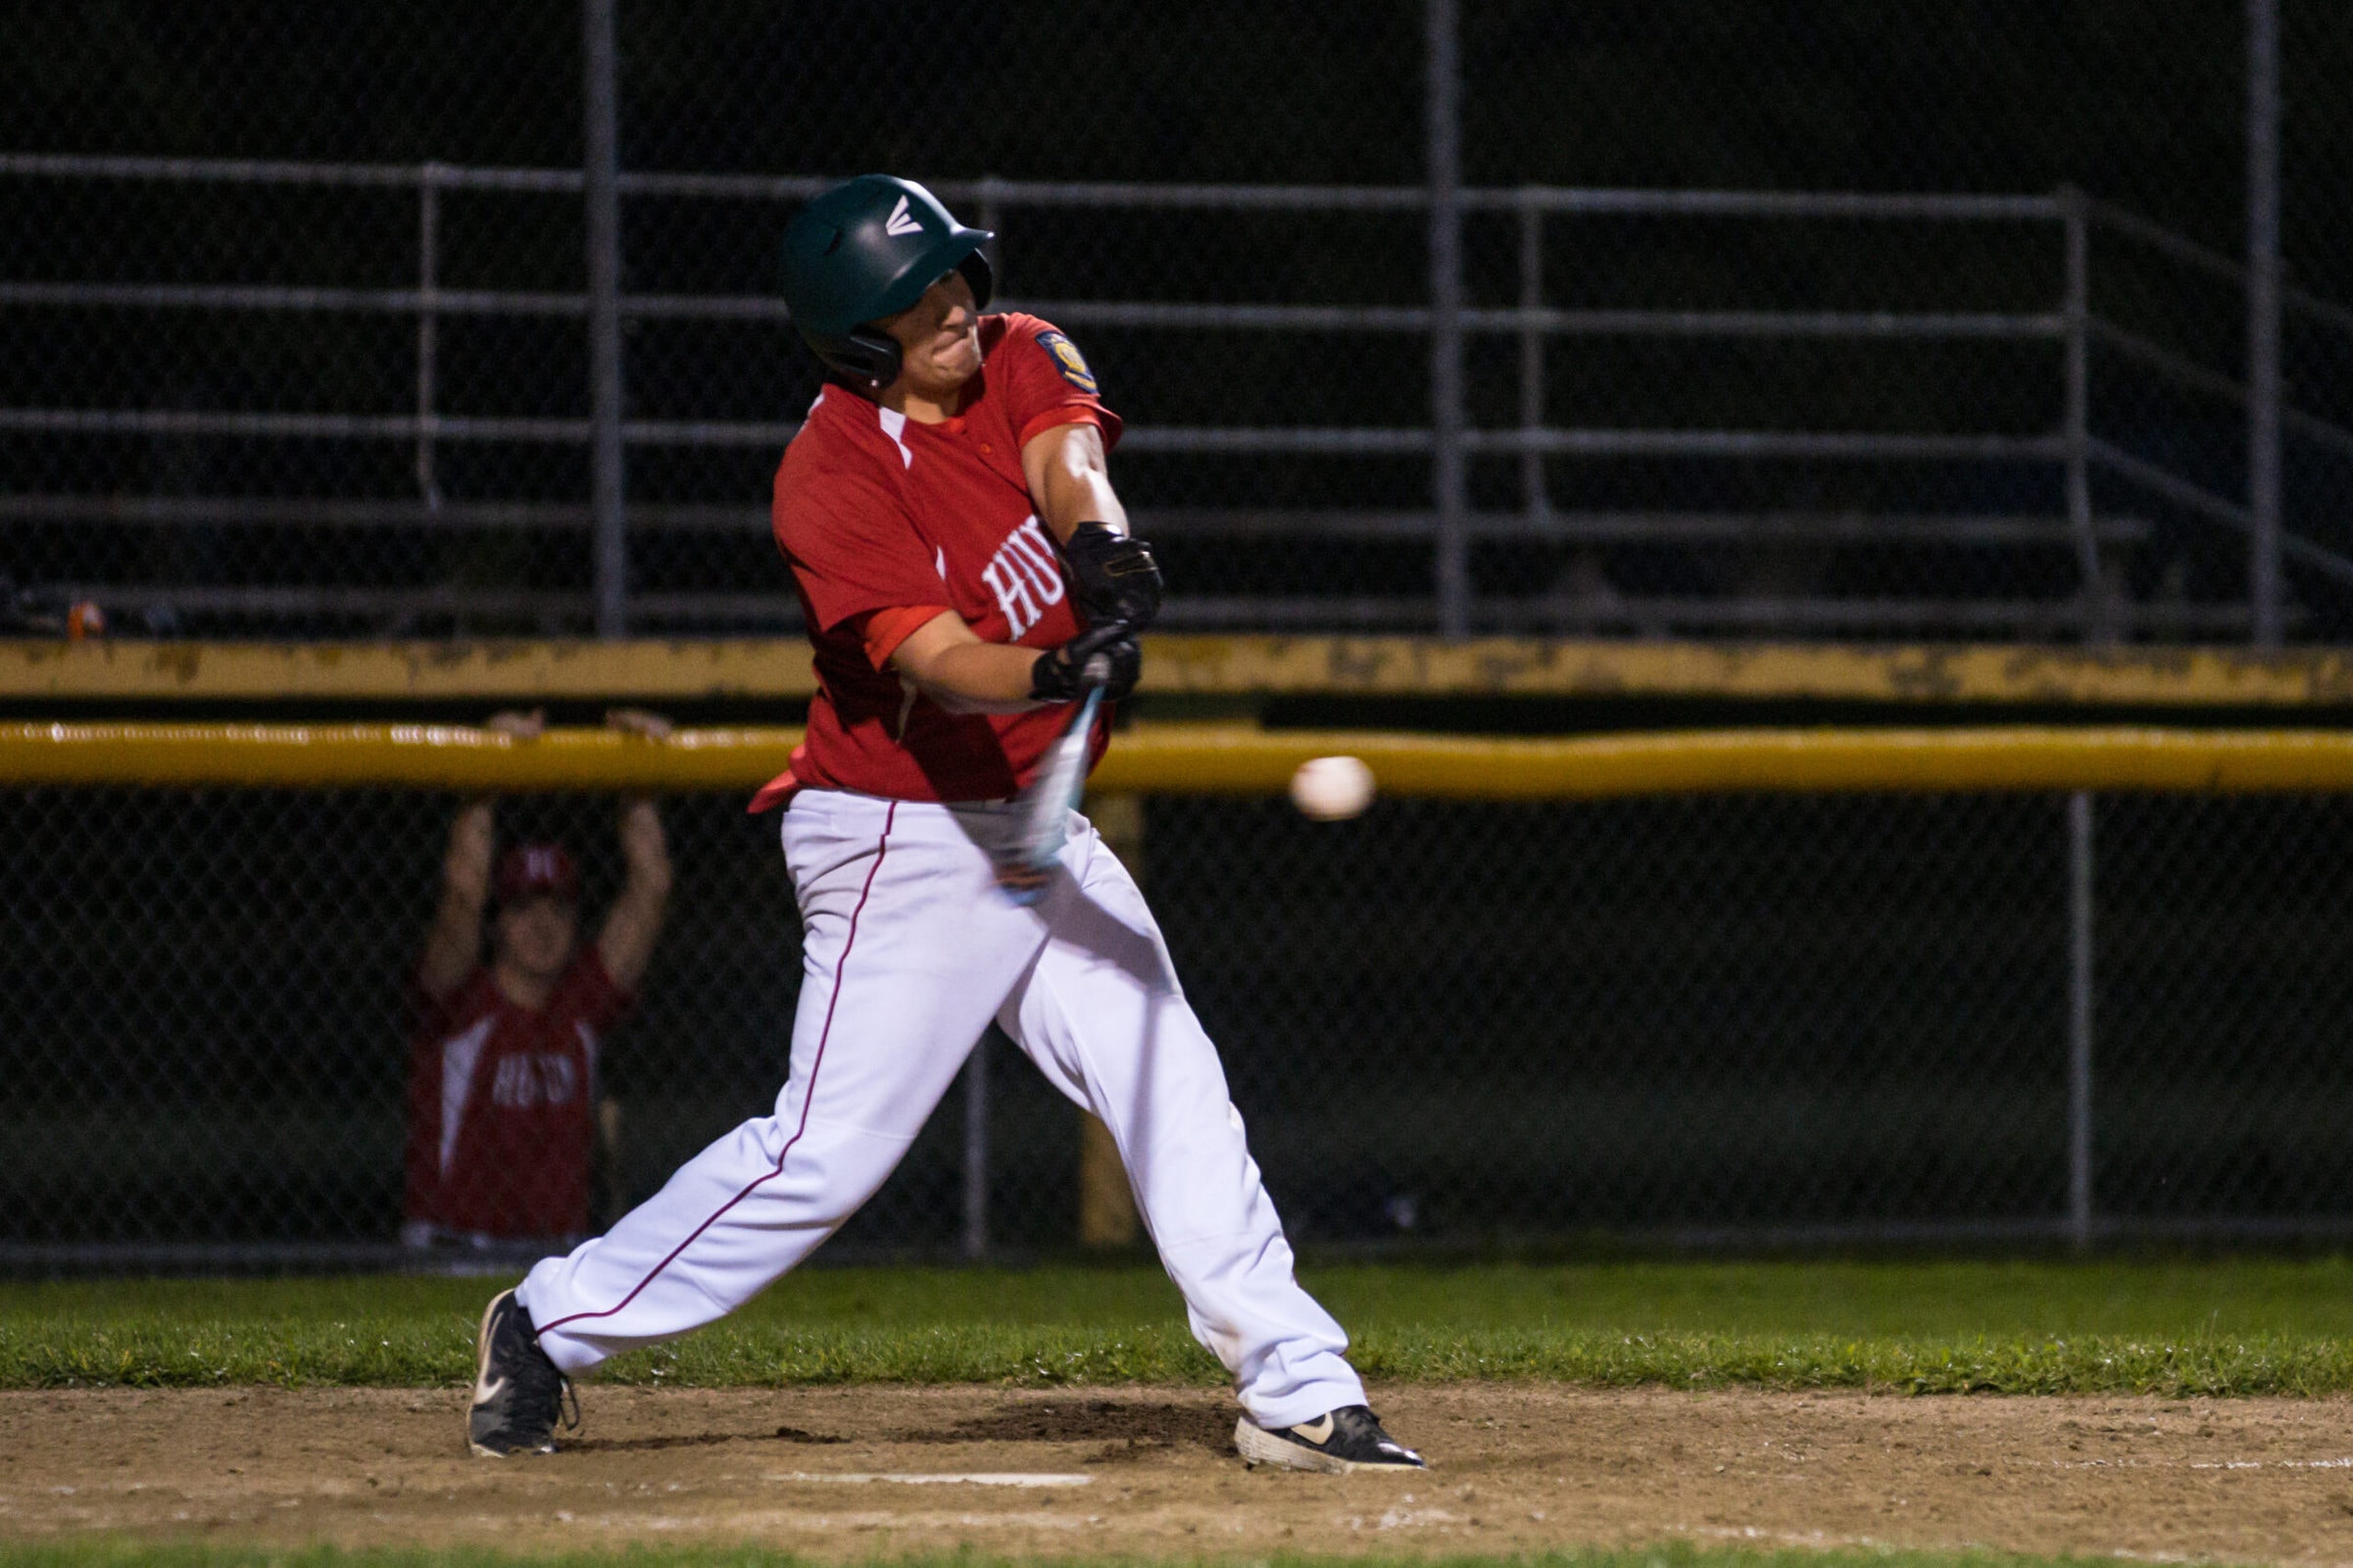 A Hudson batter swings on a pitch as his team looked to rally late in their game against Natick.